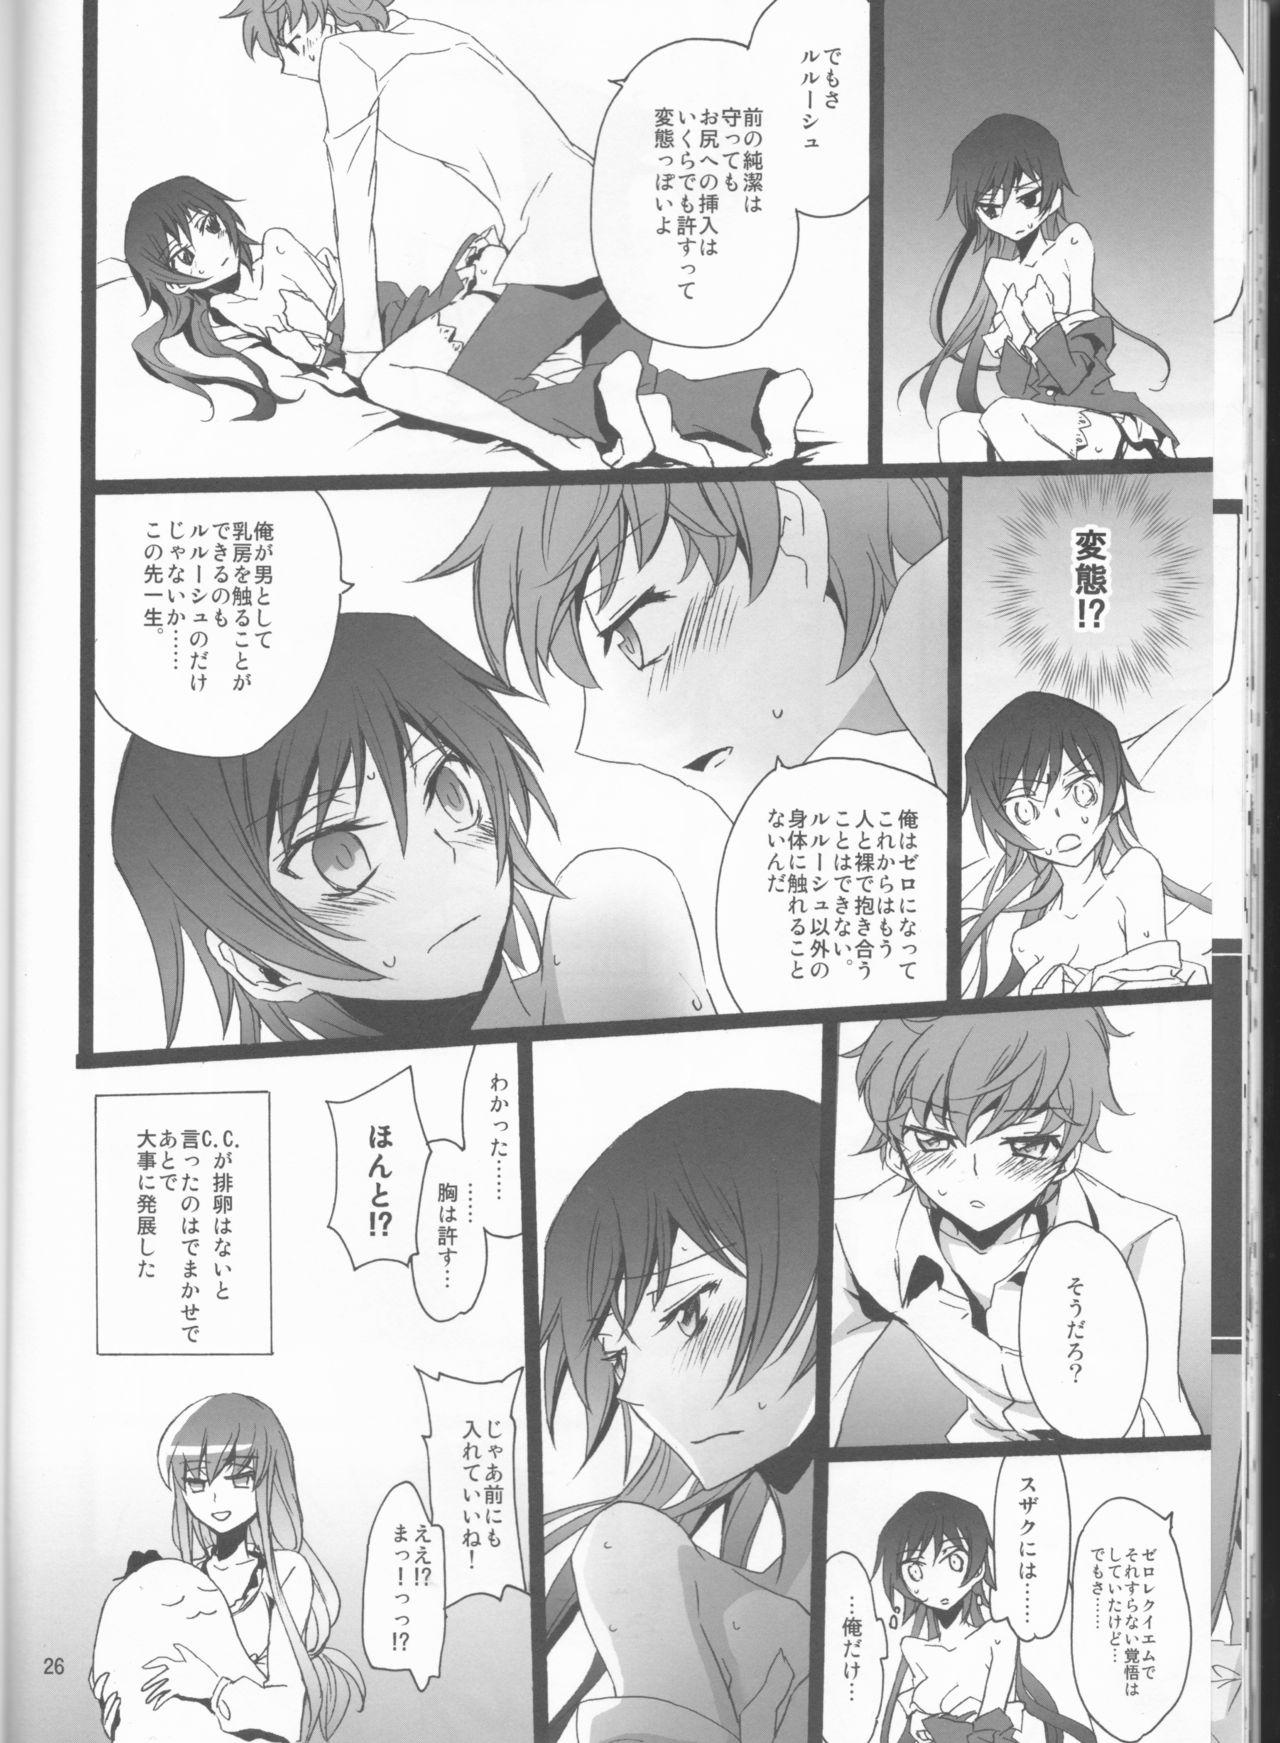 Stepbrother Chameleon Girl - Code geass Perra - Page 26